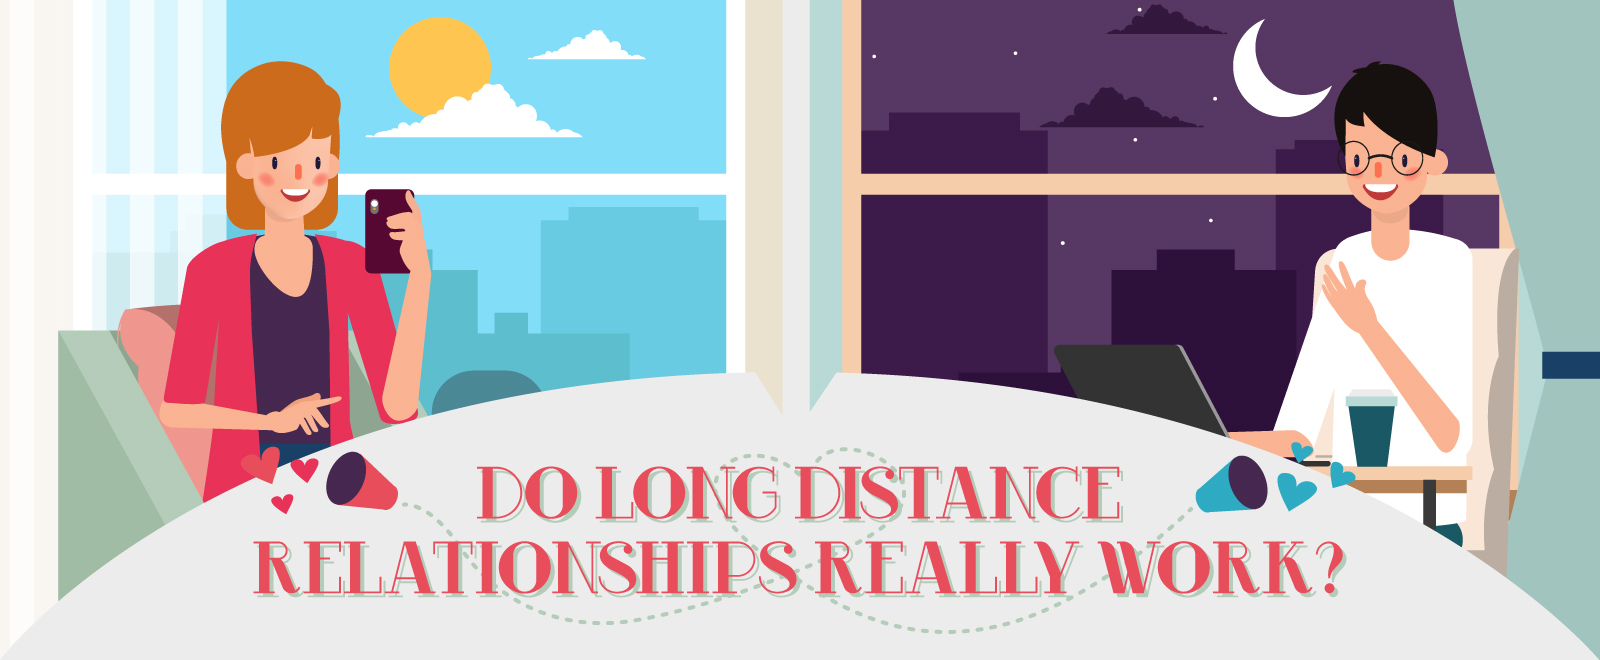 Long Distance Break Up: How to Do It Right When It Has to Be Done